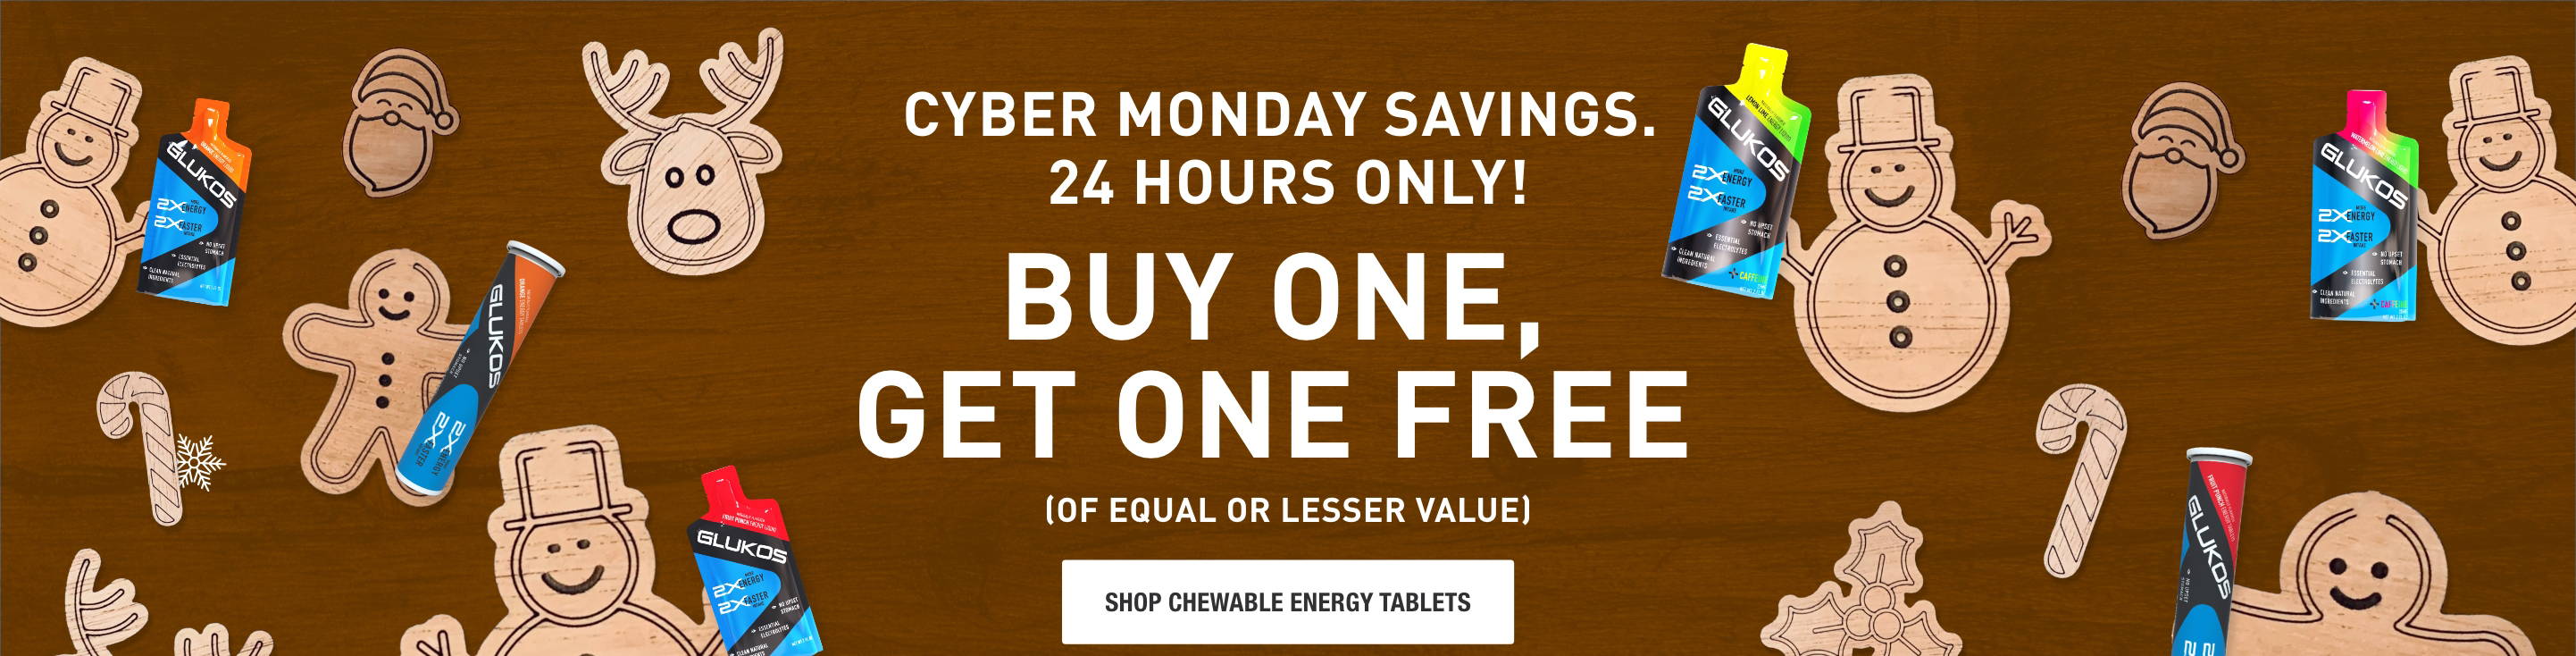 Cyber Monday Savings. 24 hours only. Buy One Get One Free of equal or lesser value. Shop Chewable Energy Tablets.